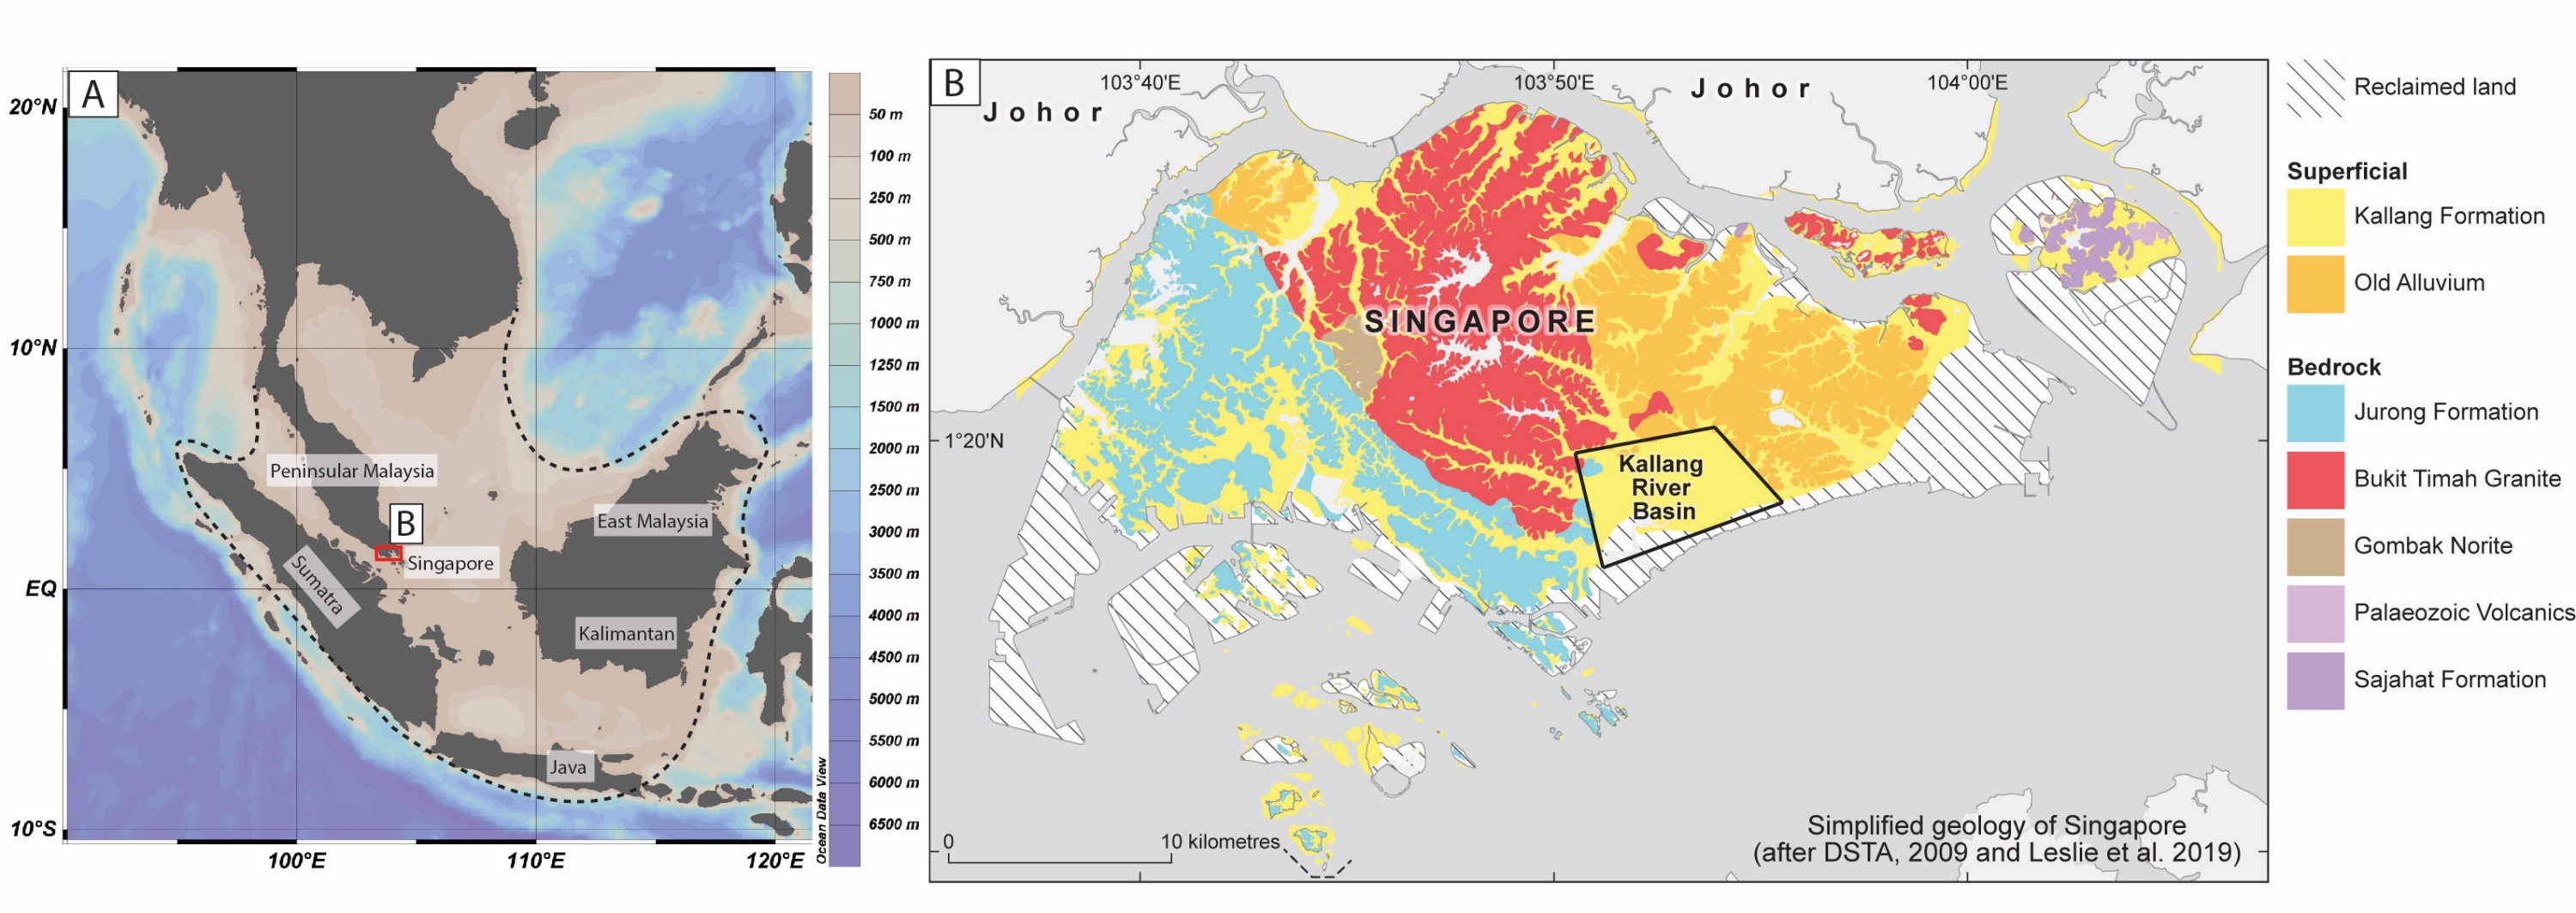 Composite figure providing geographical context. A) Regional map of Southeast Asia with red rectangle showing the location of Singapore. Dashed line marks the estimated maximum extent of Sundaland based on modern bathymetric data [(produced by Ocean Data View (Schlitzer, 2002)]. B) Map showing the basic geological units of Singapore based on the current nomenclature (DSTA, 2009)